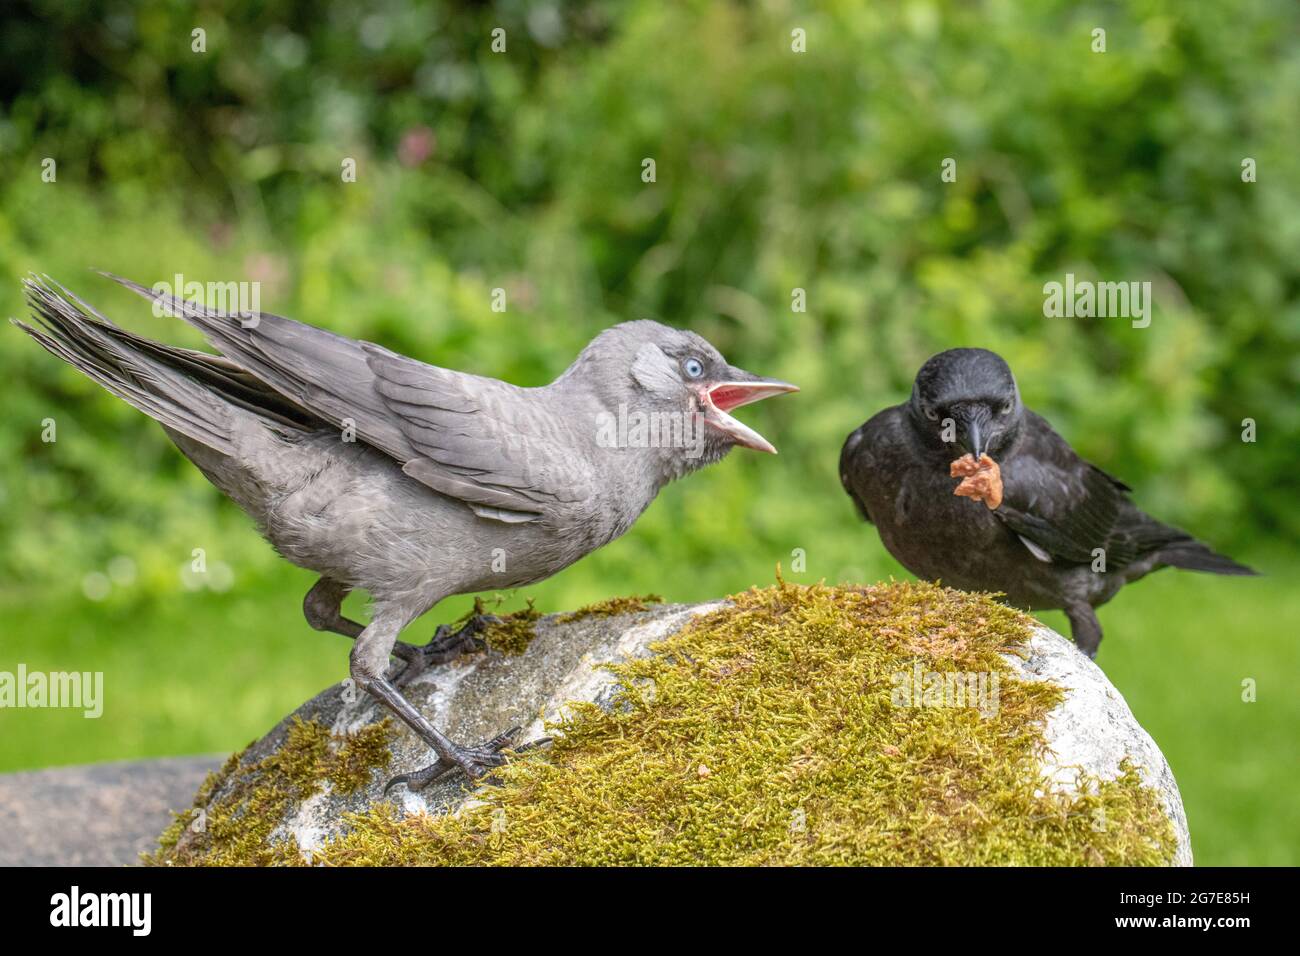 Jackdaws (Corvus monedula). Both juveniles of the year, from different nests. Grey mutation, aberrant, bird left, adopting a begging to be fed posture Stock Photo